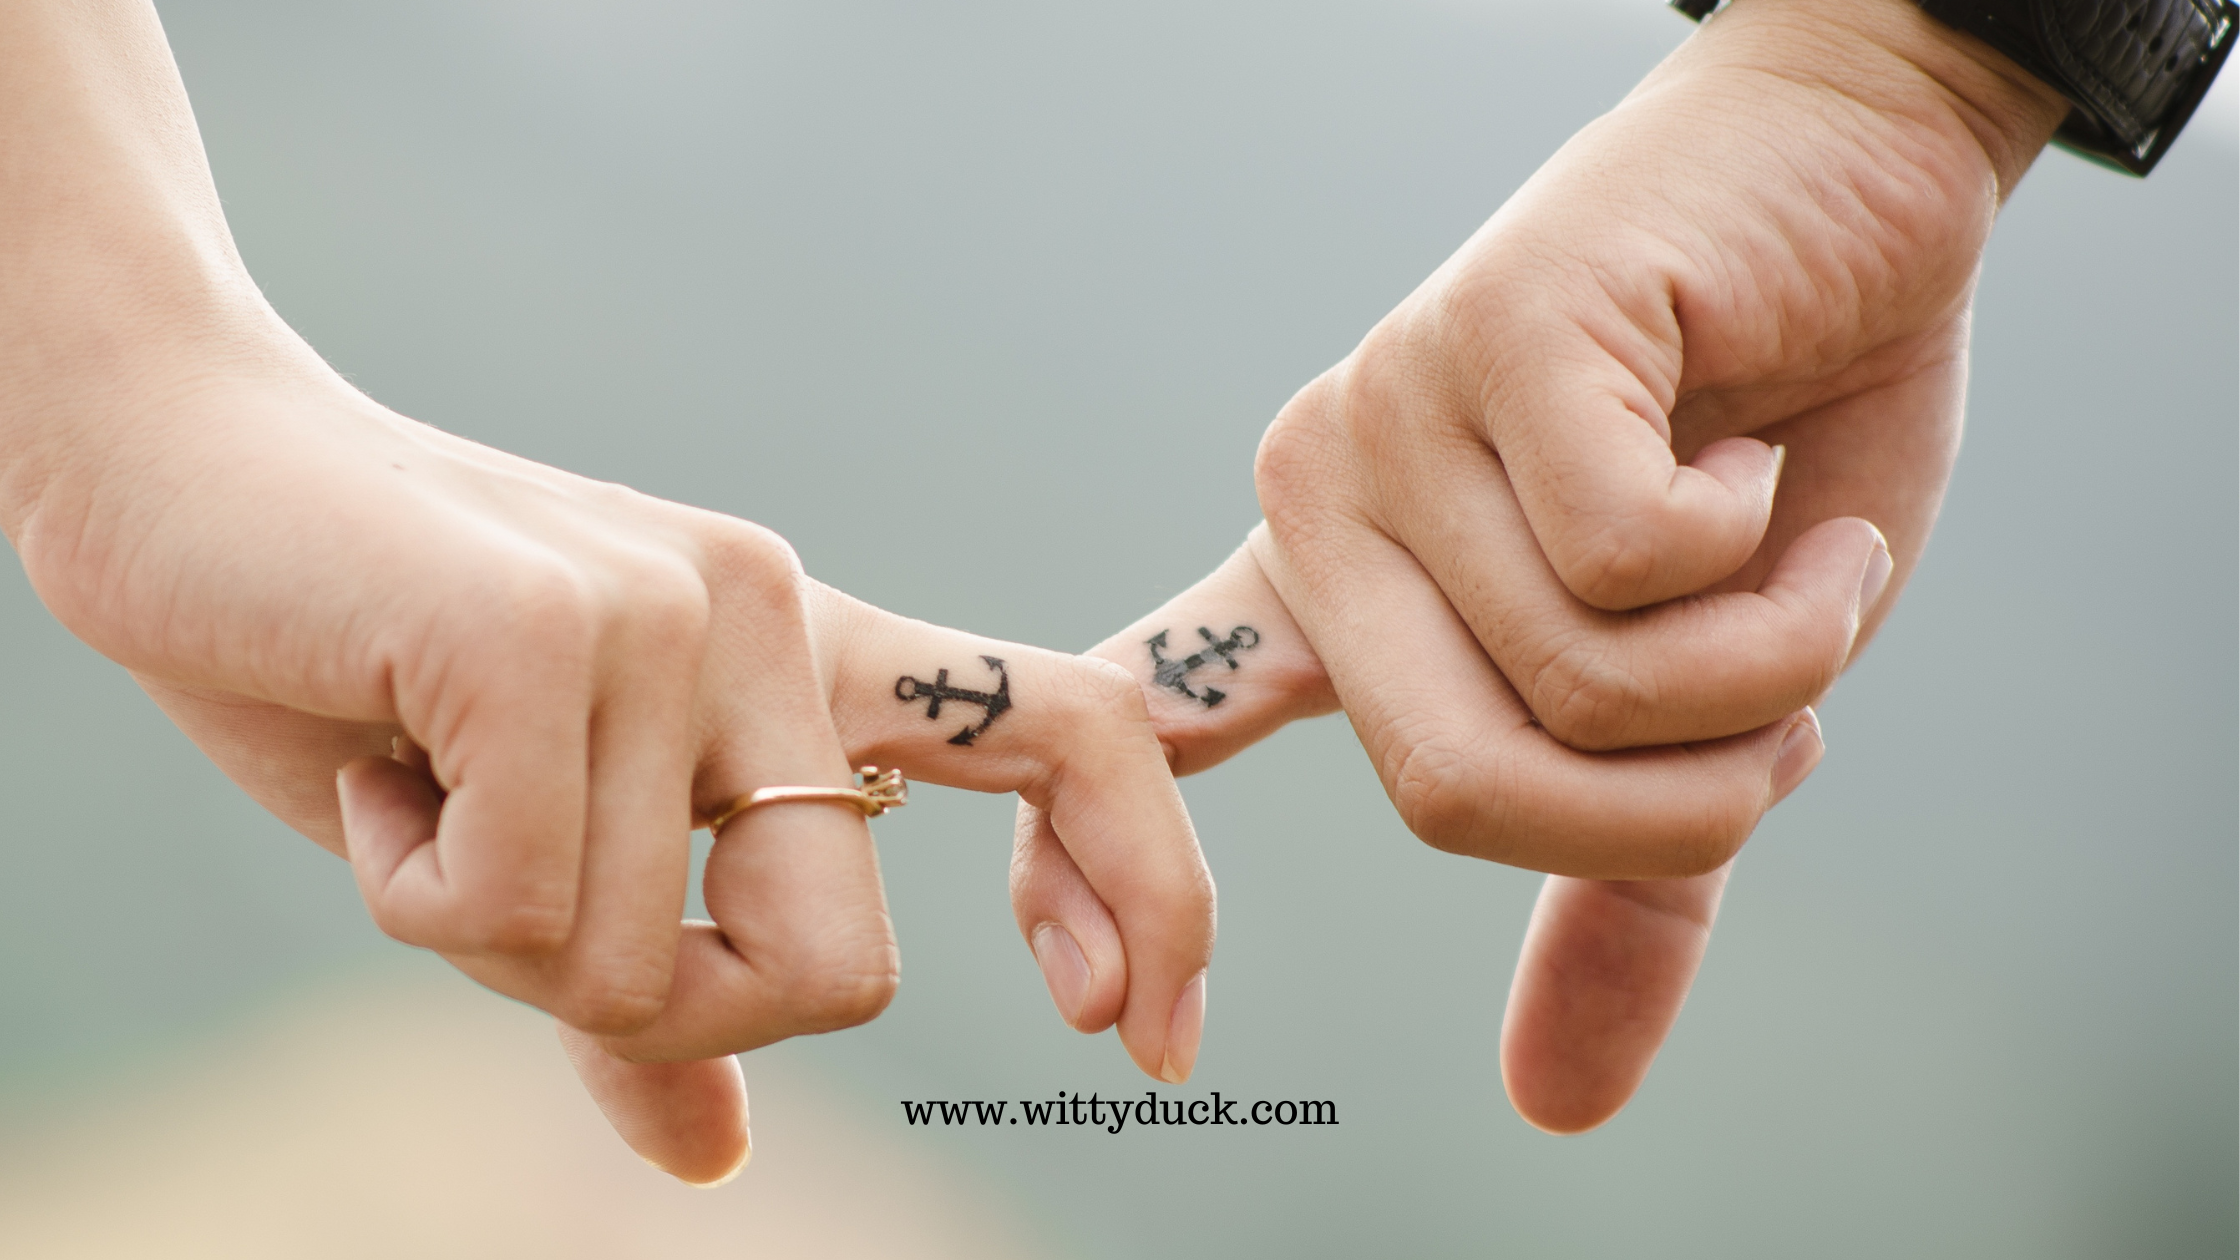 80 finger tattoos ideas for men and women to try in 2023  Legitng